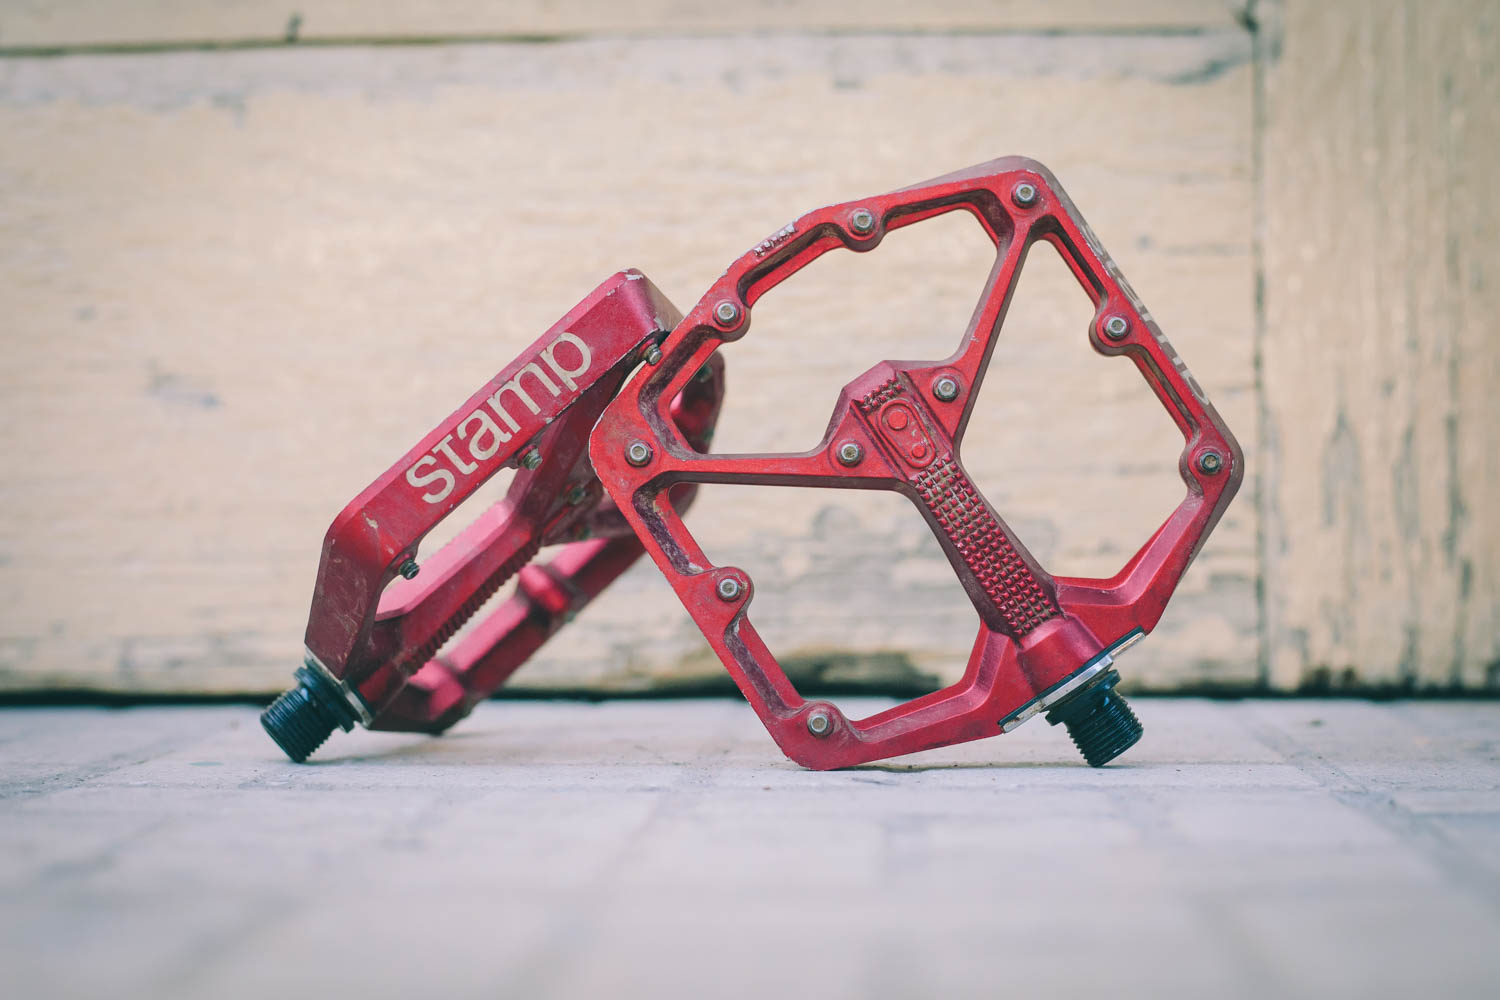 Crankbrothers Stamp Pedals Review